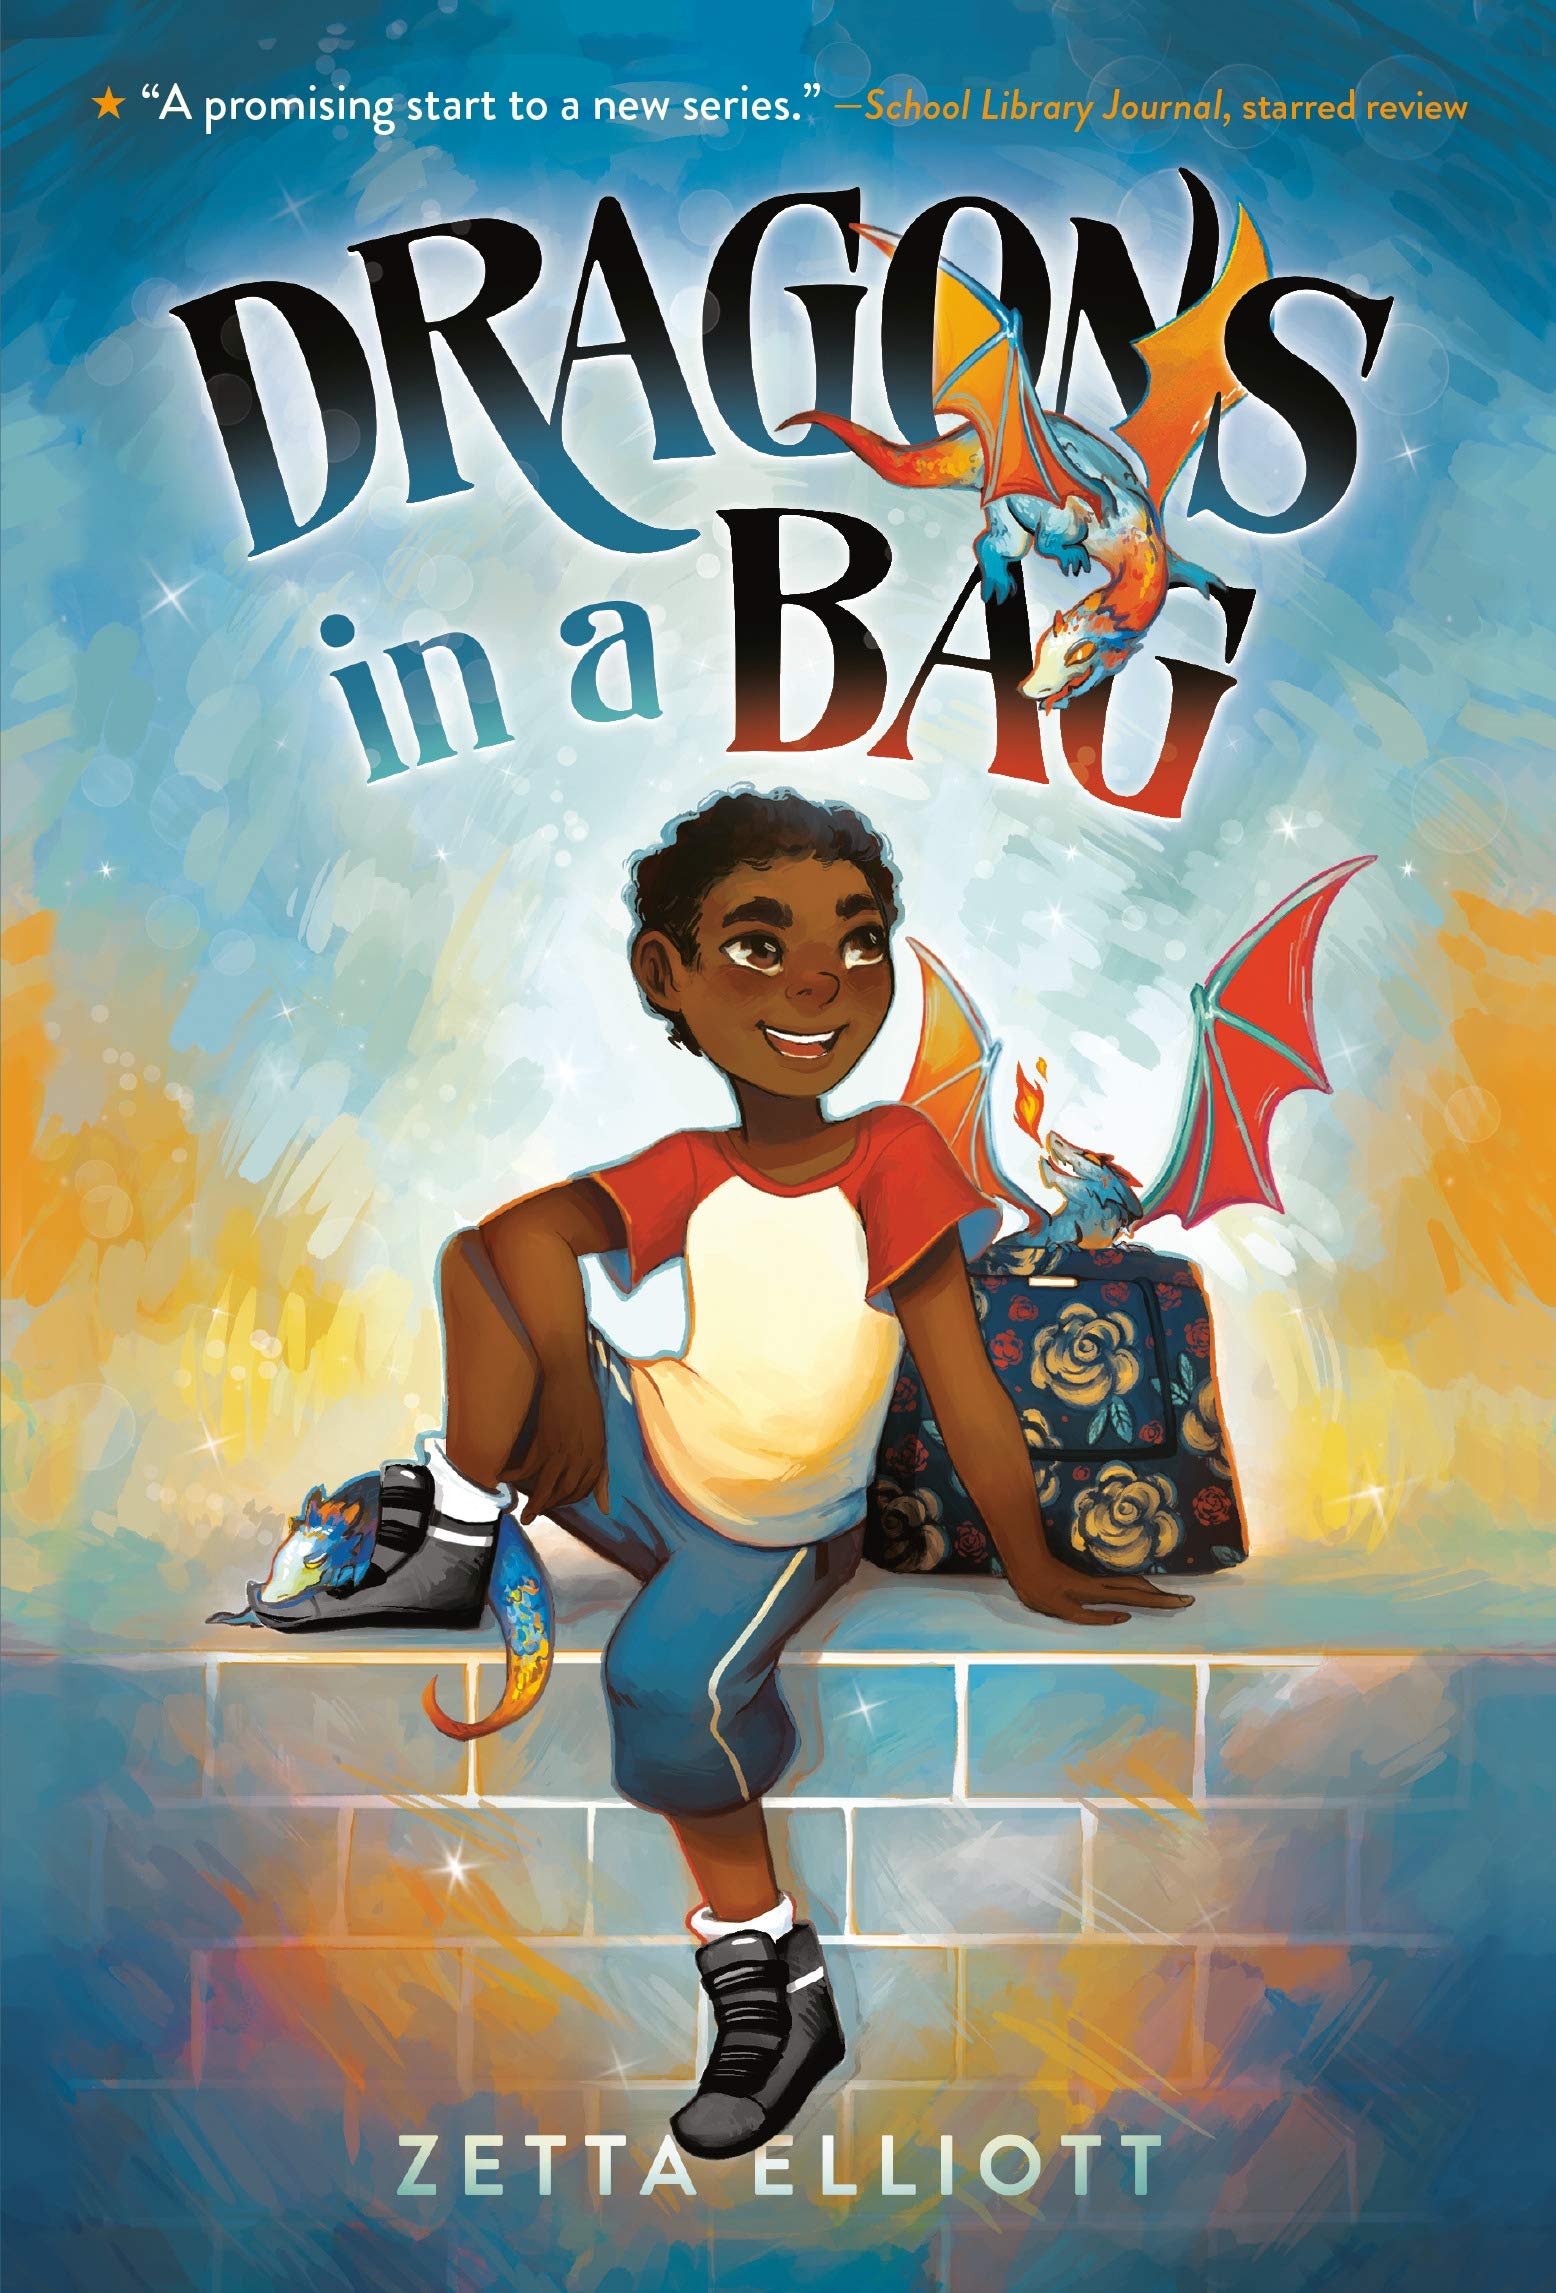 Cover of Dragons in a Bag, by Zetta Elliott, showing a boy with brown skin and black hair wearing a t-shirt, shorts, and sneakers, sitting next to a floral patterned handbag. A dragon is sitting on top of the bag, another behind the boy's shoe, and one is flying over his head where the title is written.